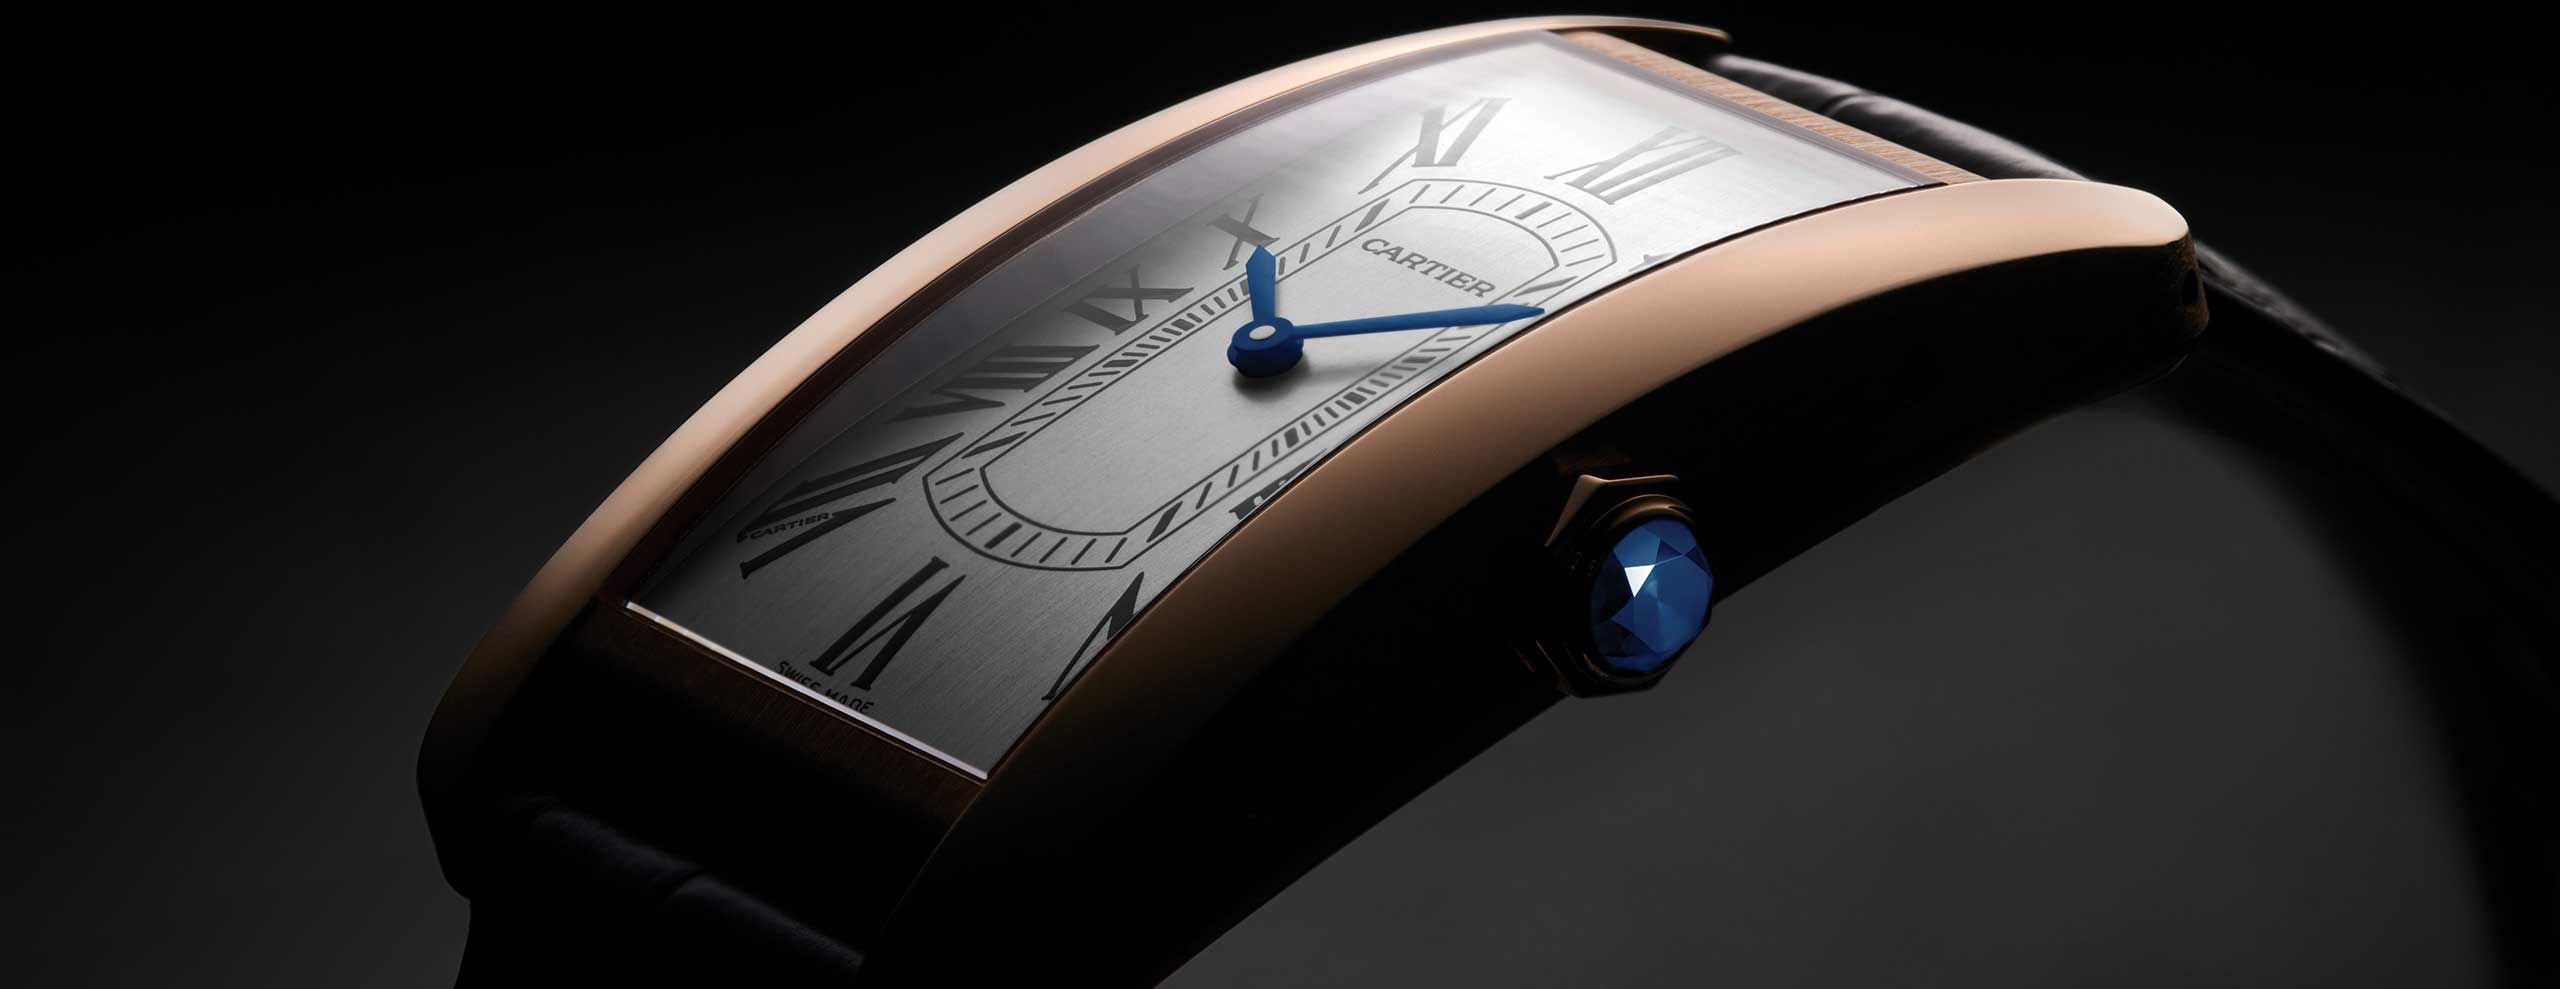 The large Tank Américaine in rose gold